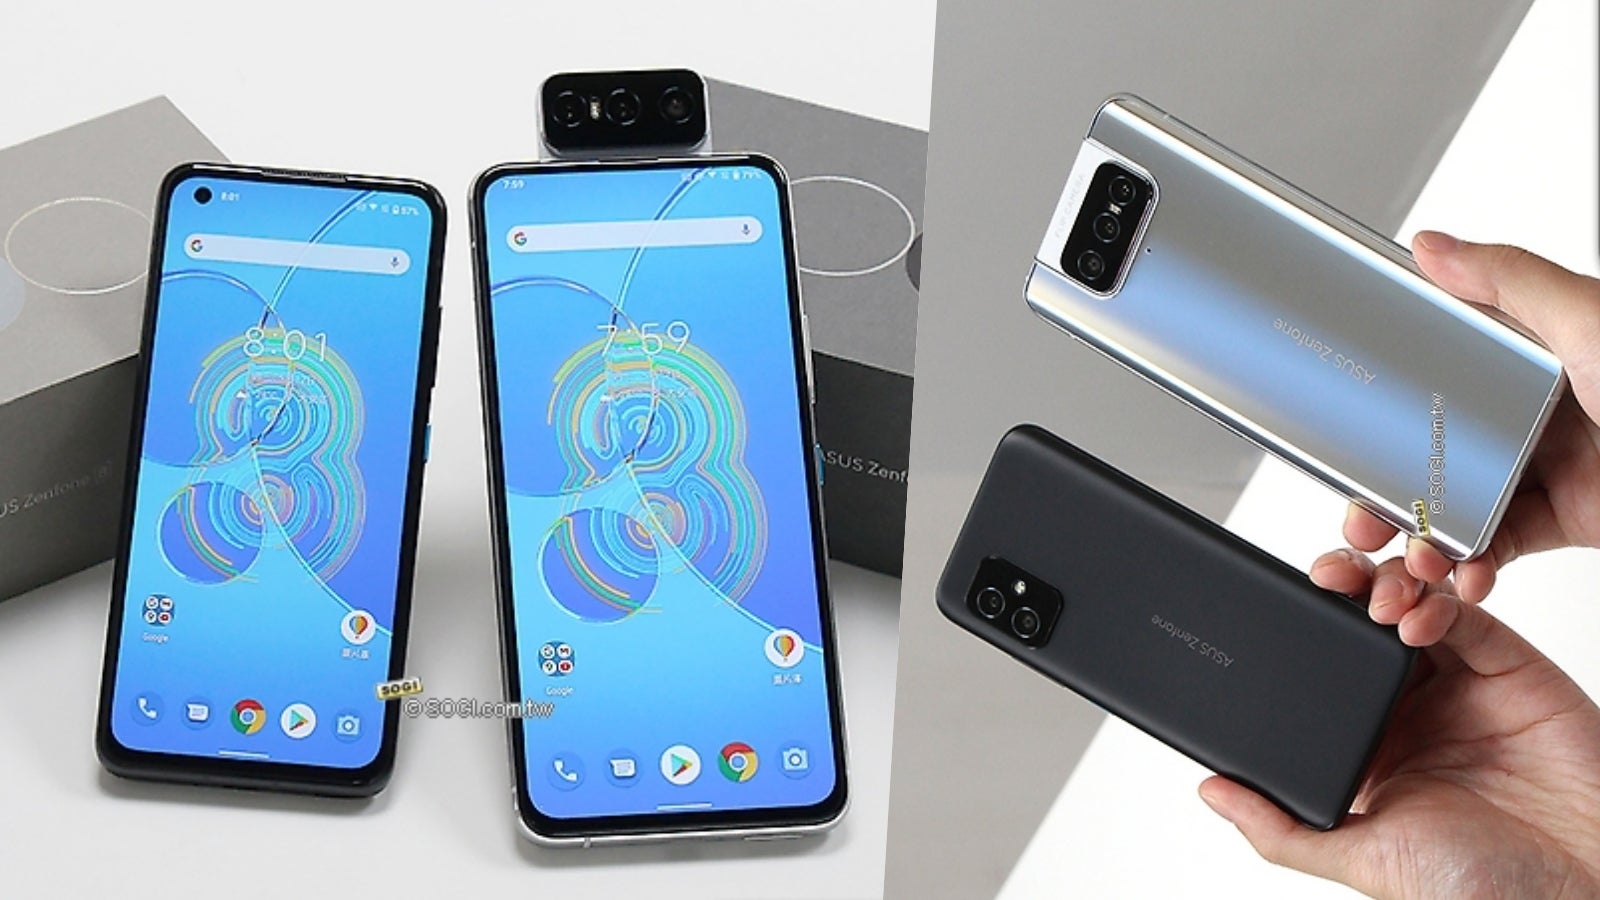 Asus used to make intriguing flagships like the Zenfone 8 Flip (pictured on the right). What's with the boring, overpriced Zenfone 10, Asus? - Zenfone 10: Not how you compete with Samsung and Apple - Asus needs a reality check